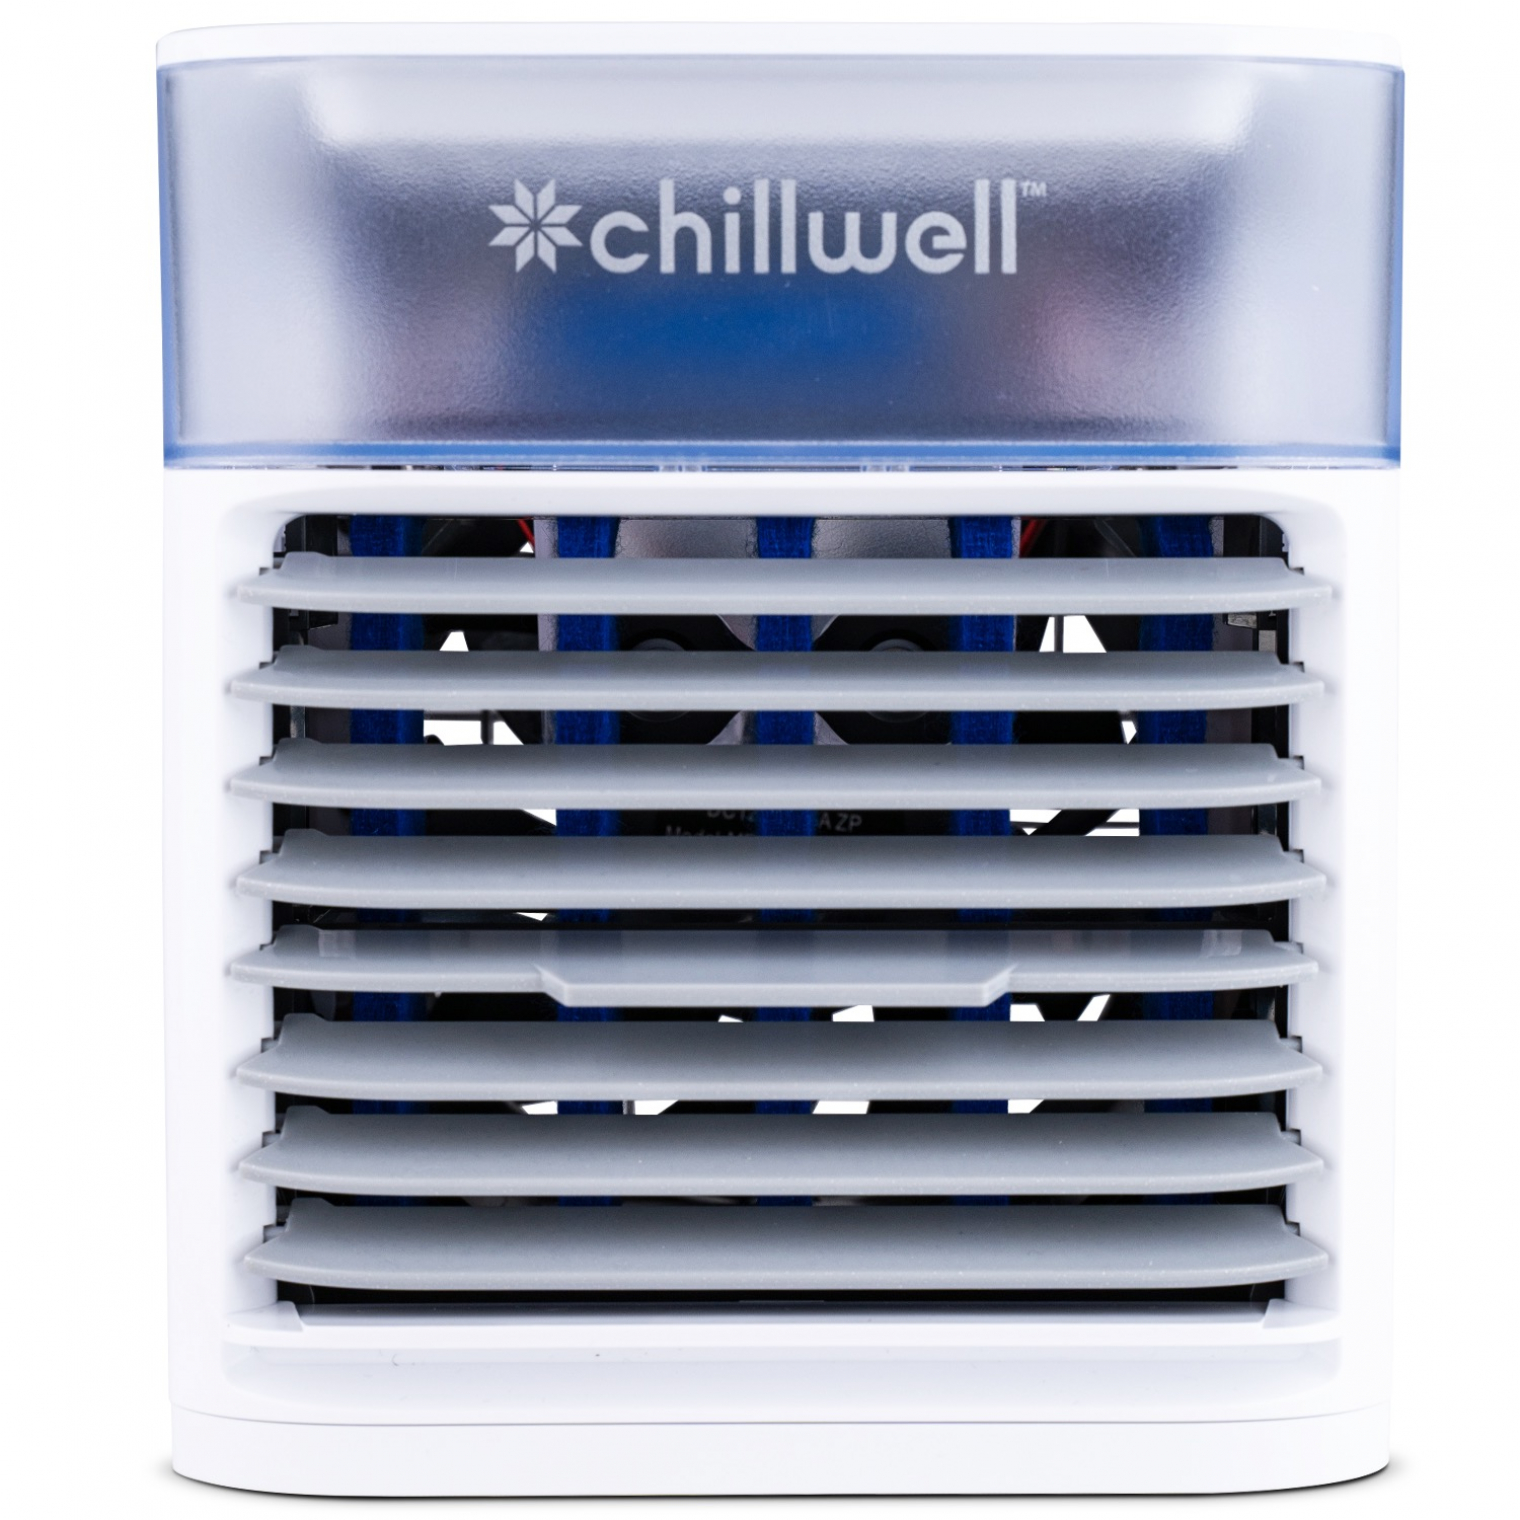 Chillwell AC As Seen On Tv How Does It Work